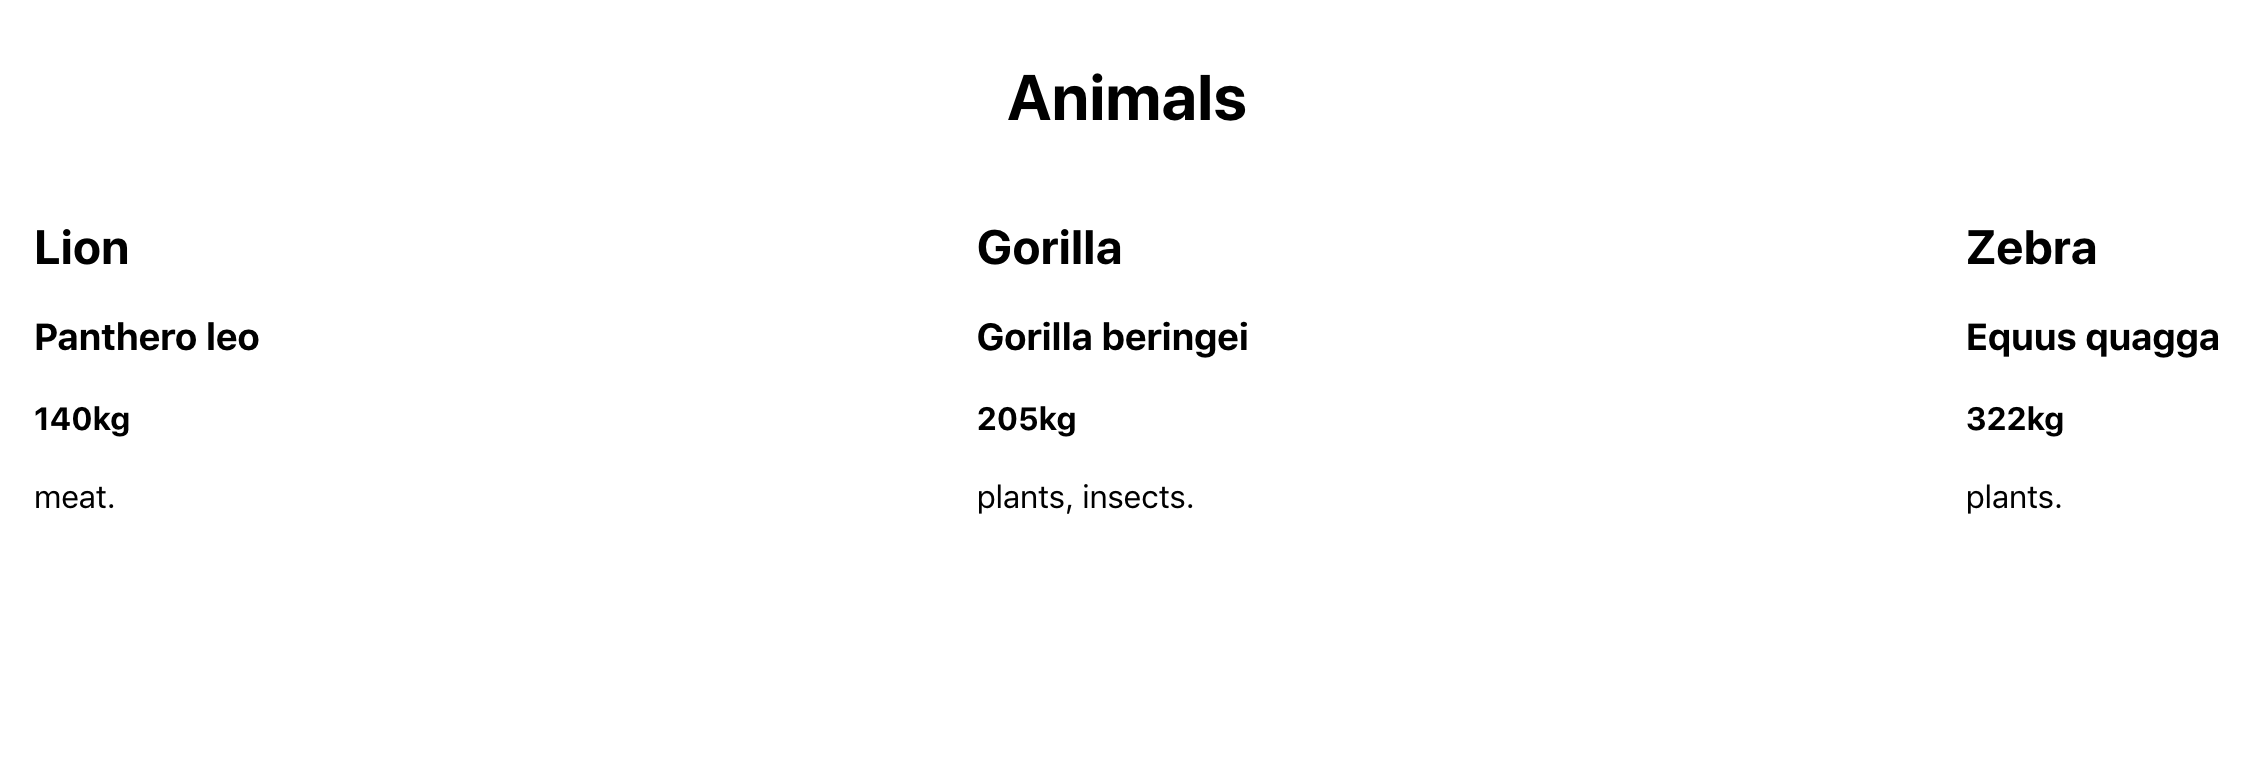 React project with animals with full data